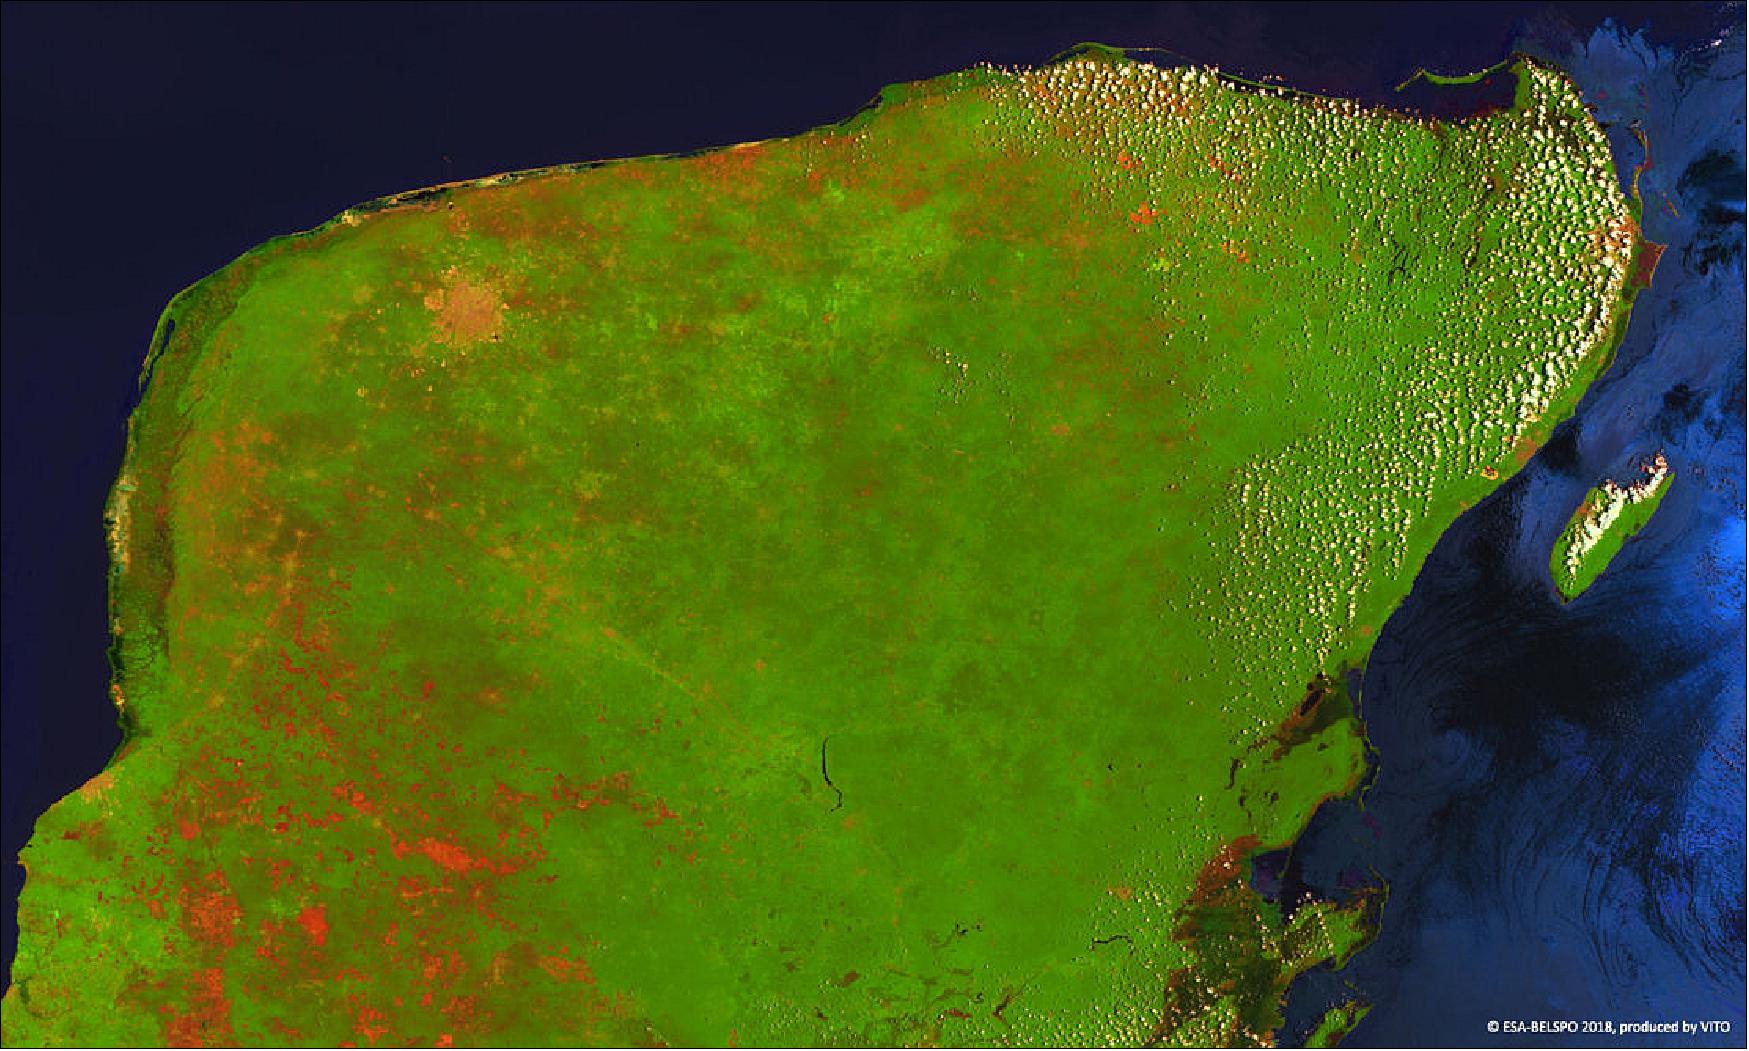 Figure 28: This 100 m resolution image of the Yucatán peninsula was acquired with PROBA-V on 23 July 2018 (image credit: ESA/Belspo – produced by VITO)